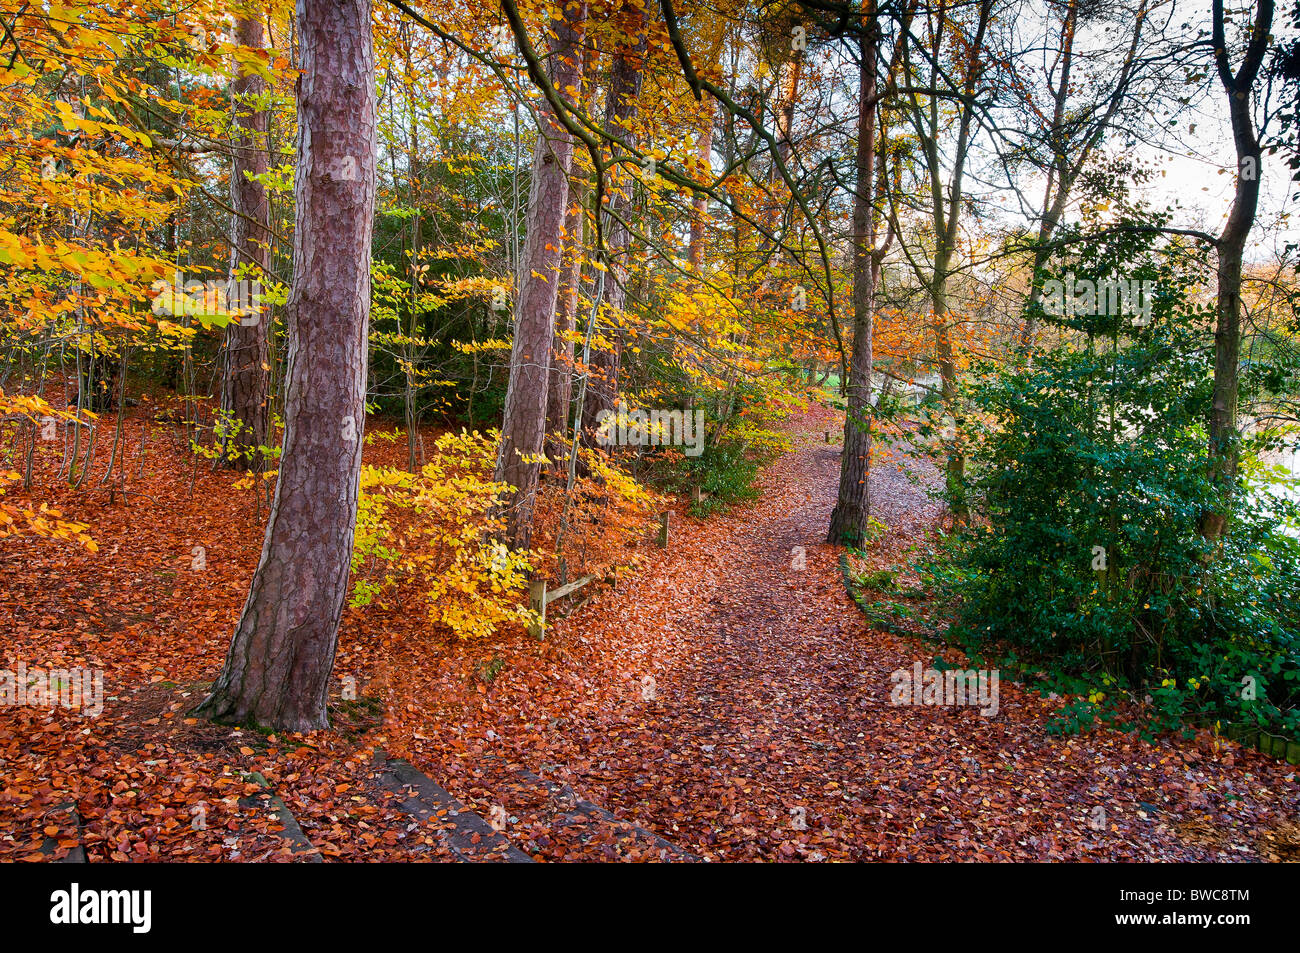 forest wood autumn fall colour warm red orange yellow leaves path trees Stock Photo